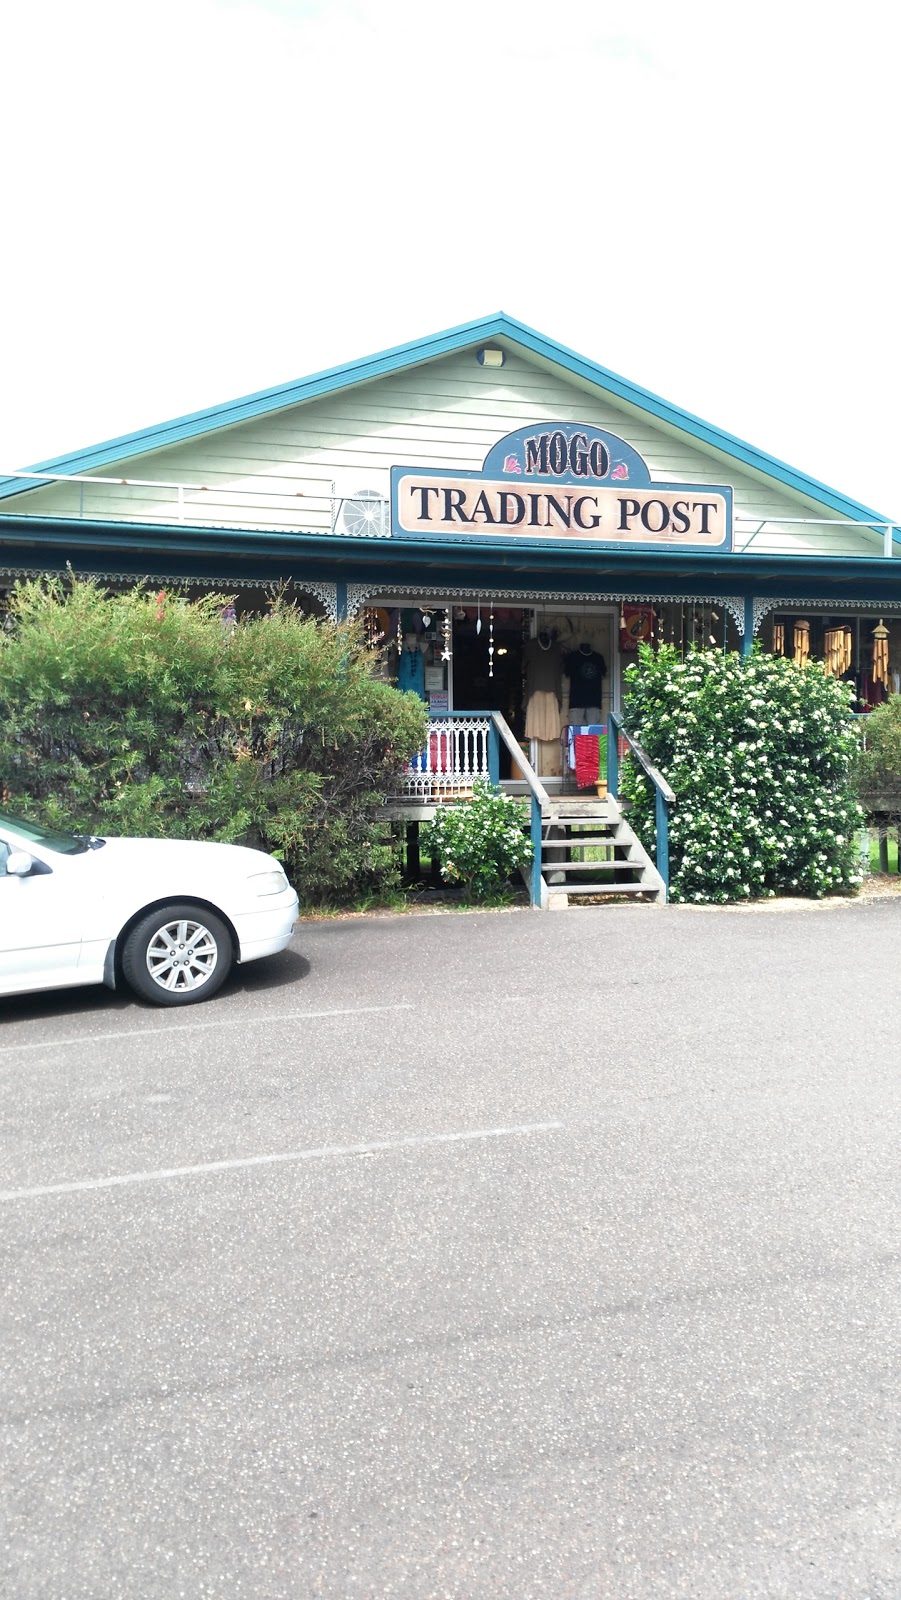 THE Old Dairy Country Crafts | store | 2 Princes Hwy, North Batemans Bay NSW 2536, Australia | 0244743524 OR +61 2 4474 3524